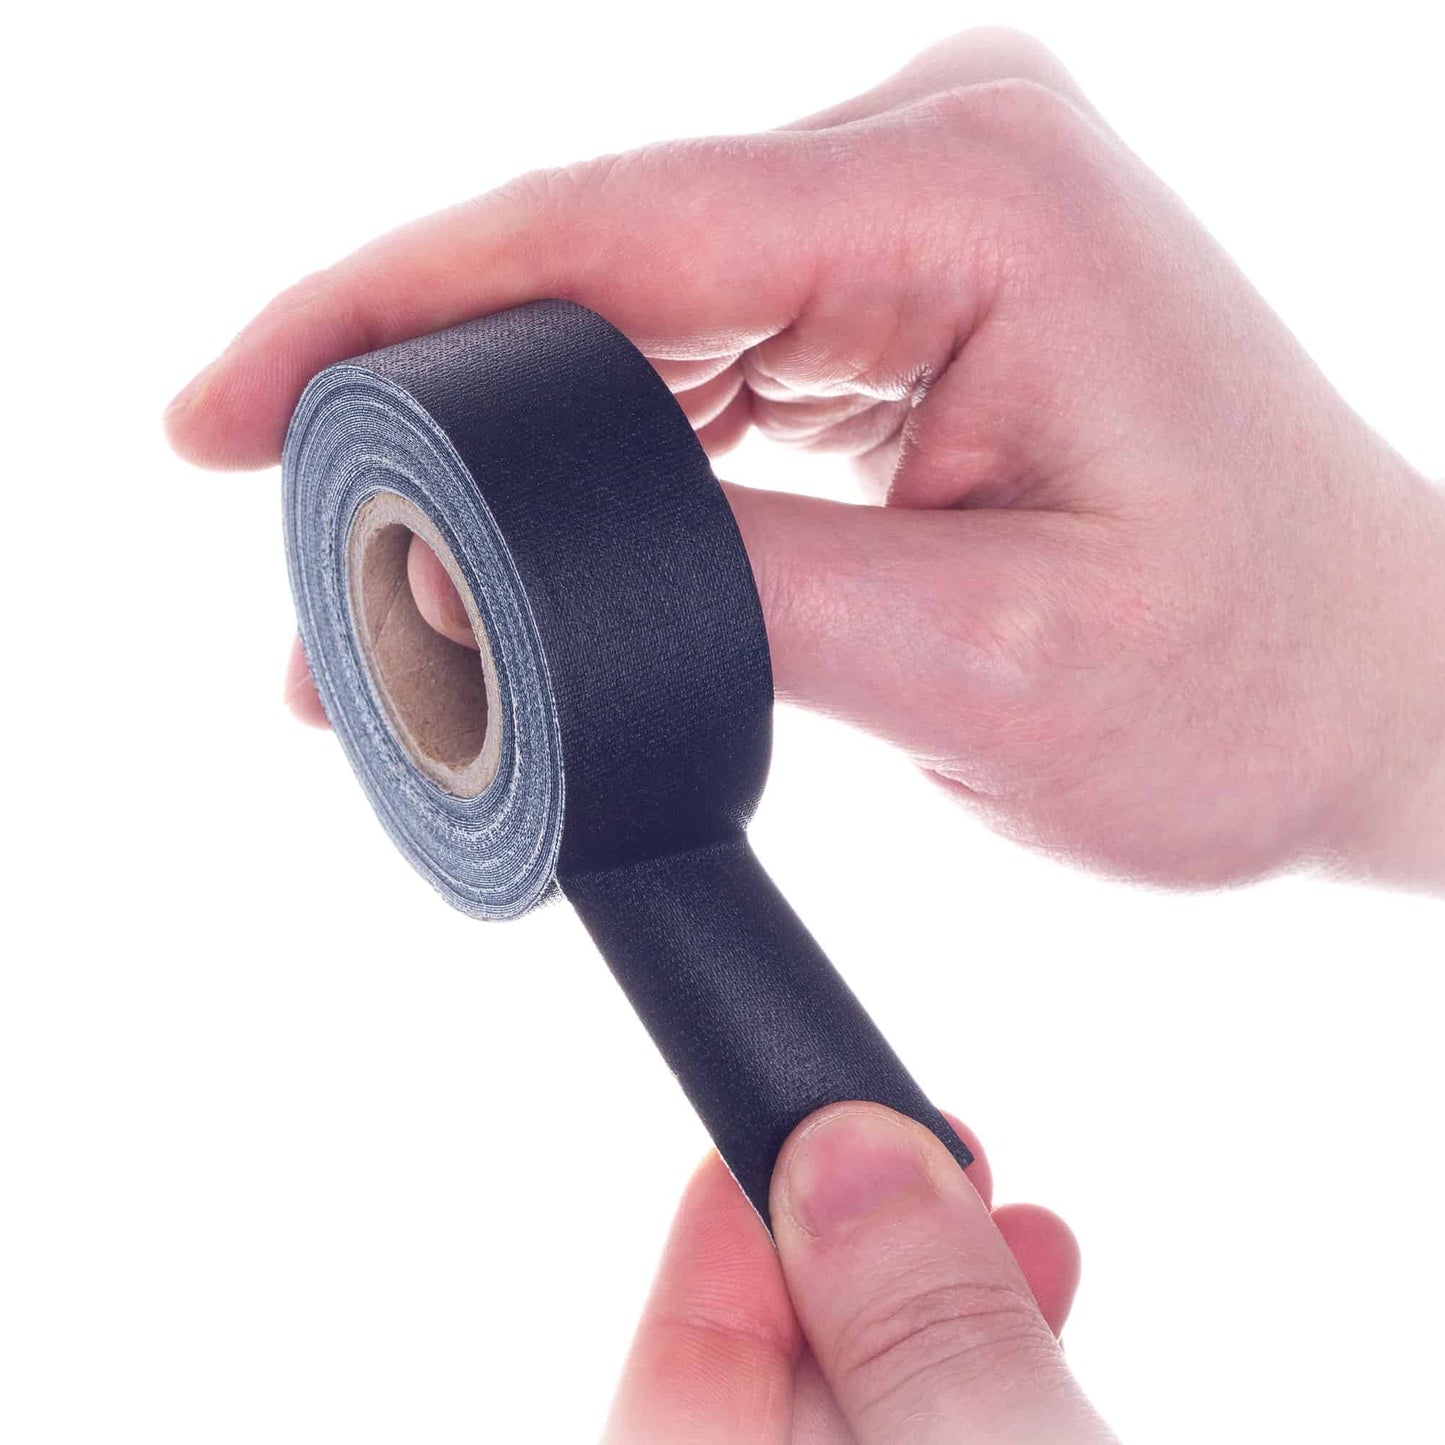 Mini Gaffer Tape Rolls by GafferPower 1 inch x 8yards - Pack of 4 Black, Made in The USA, Heavy Duty Gaffer's Tape